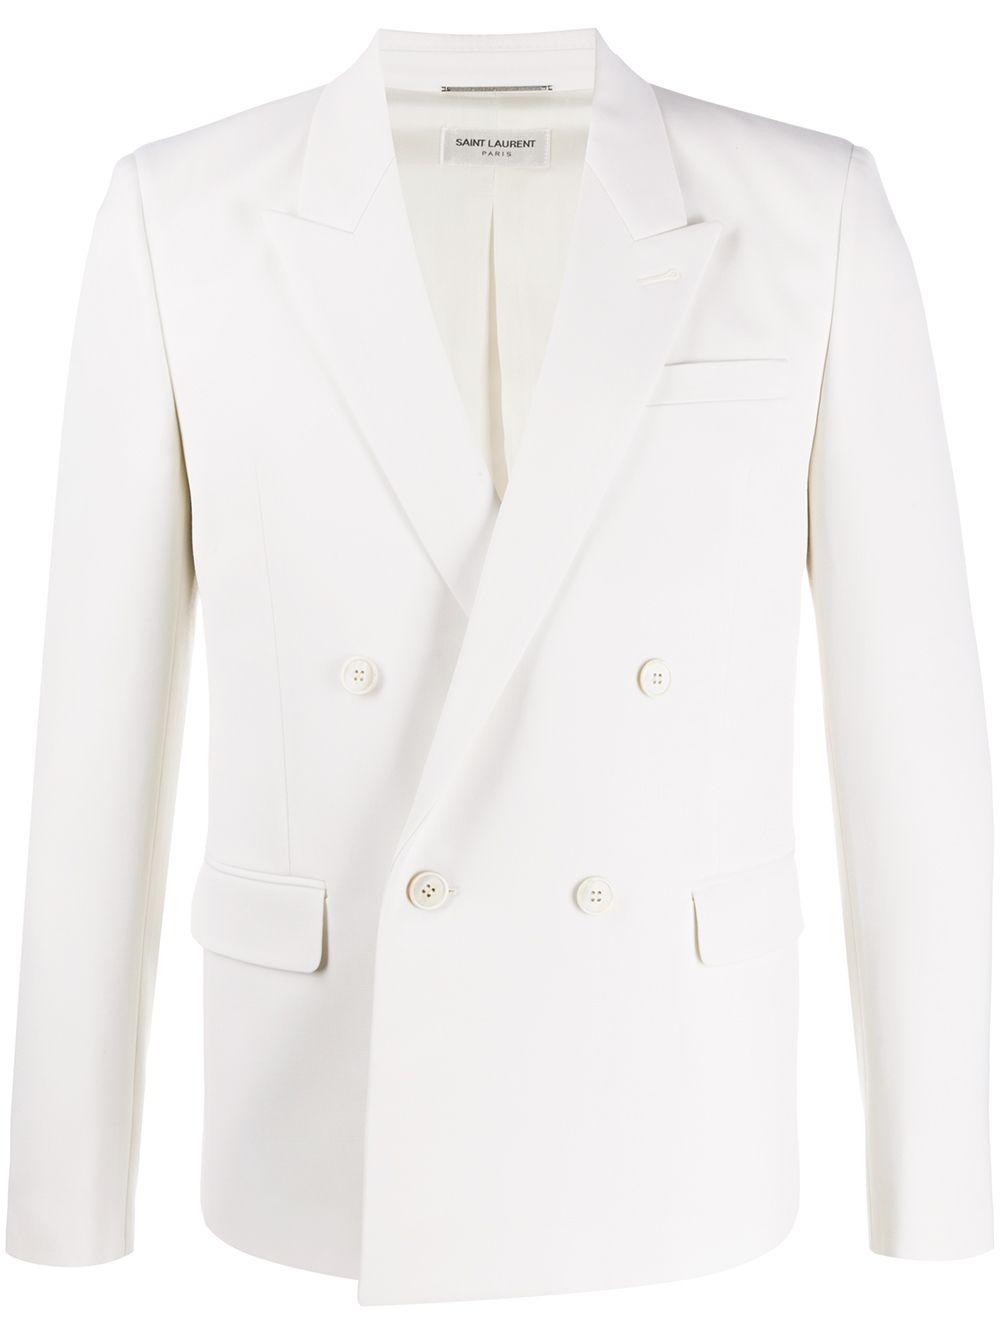 Saint Laurent Wool Double-breasted Tailored Blazer in White for Men - Lyst